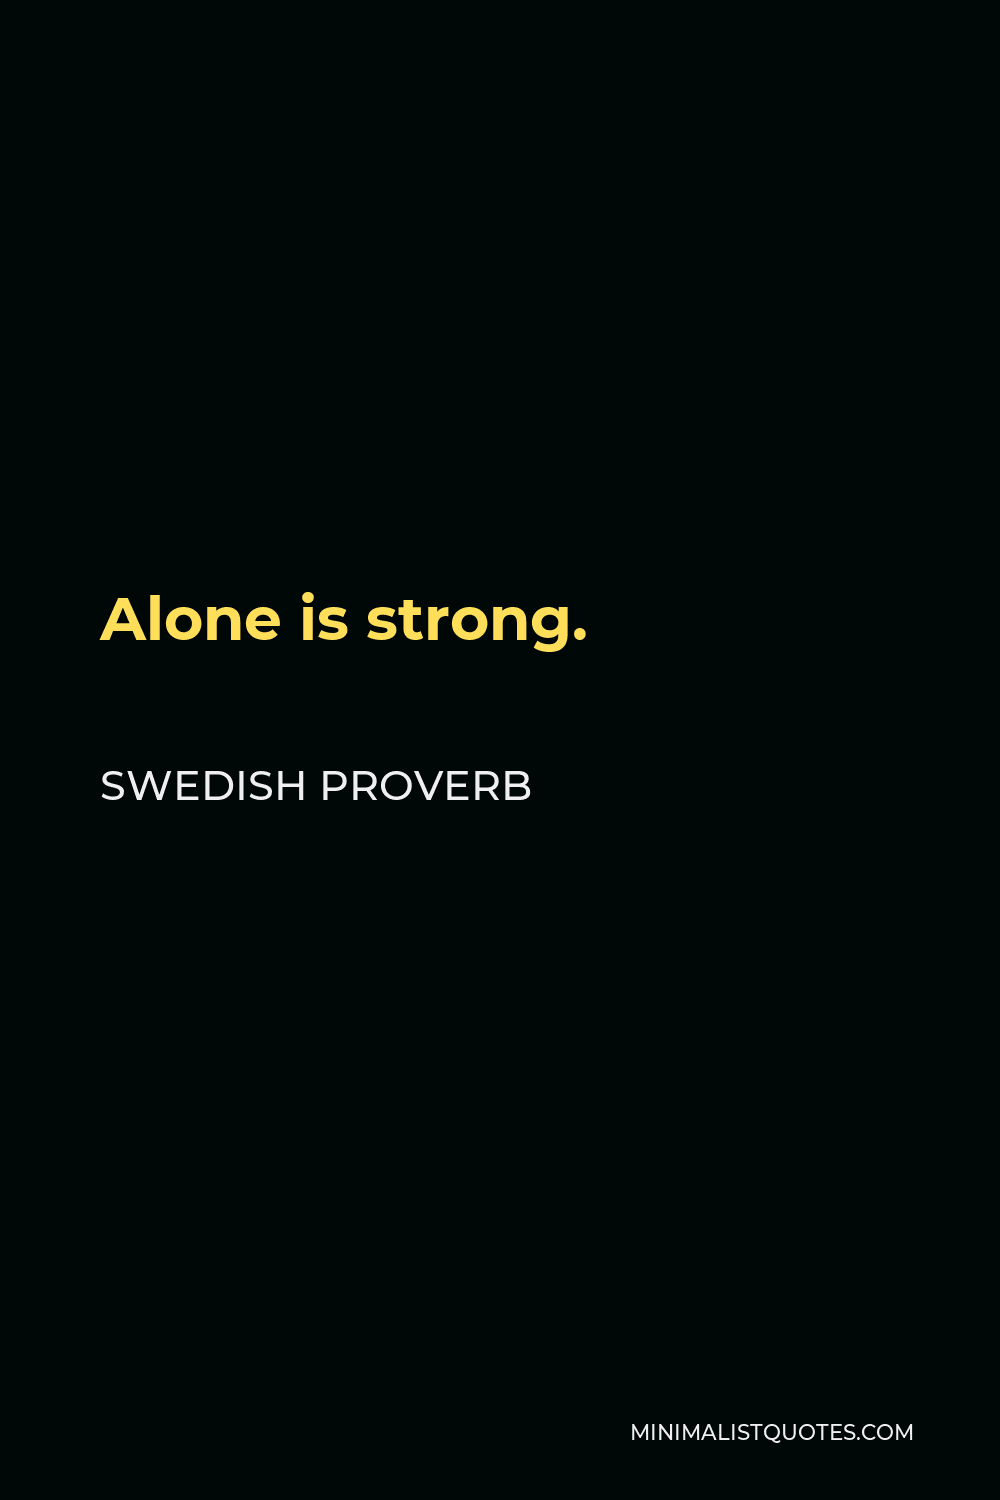 Swedish Proverb Quote - Alone is strong.